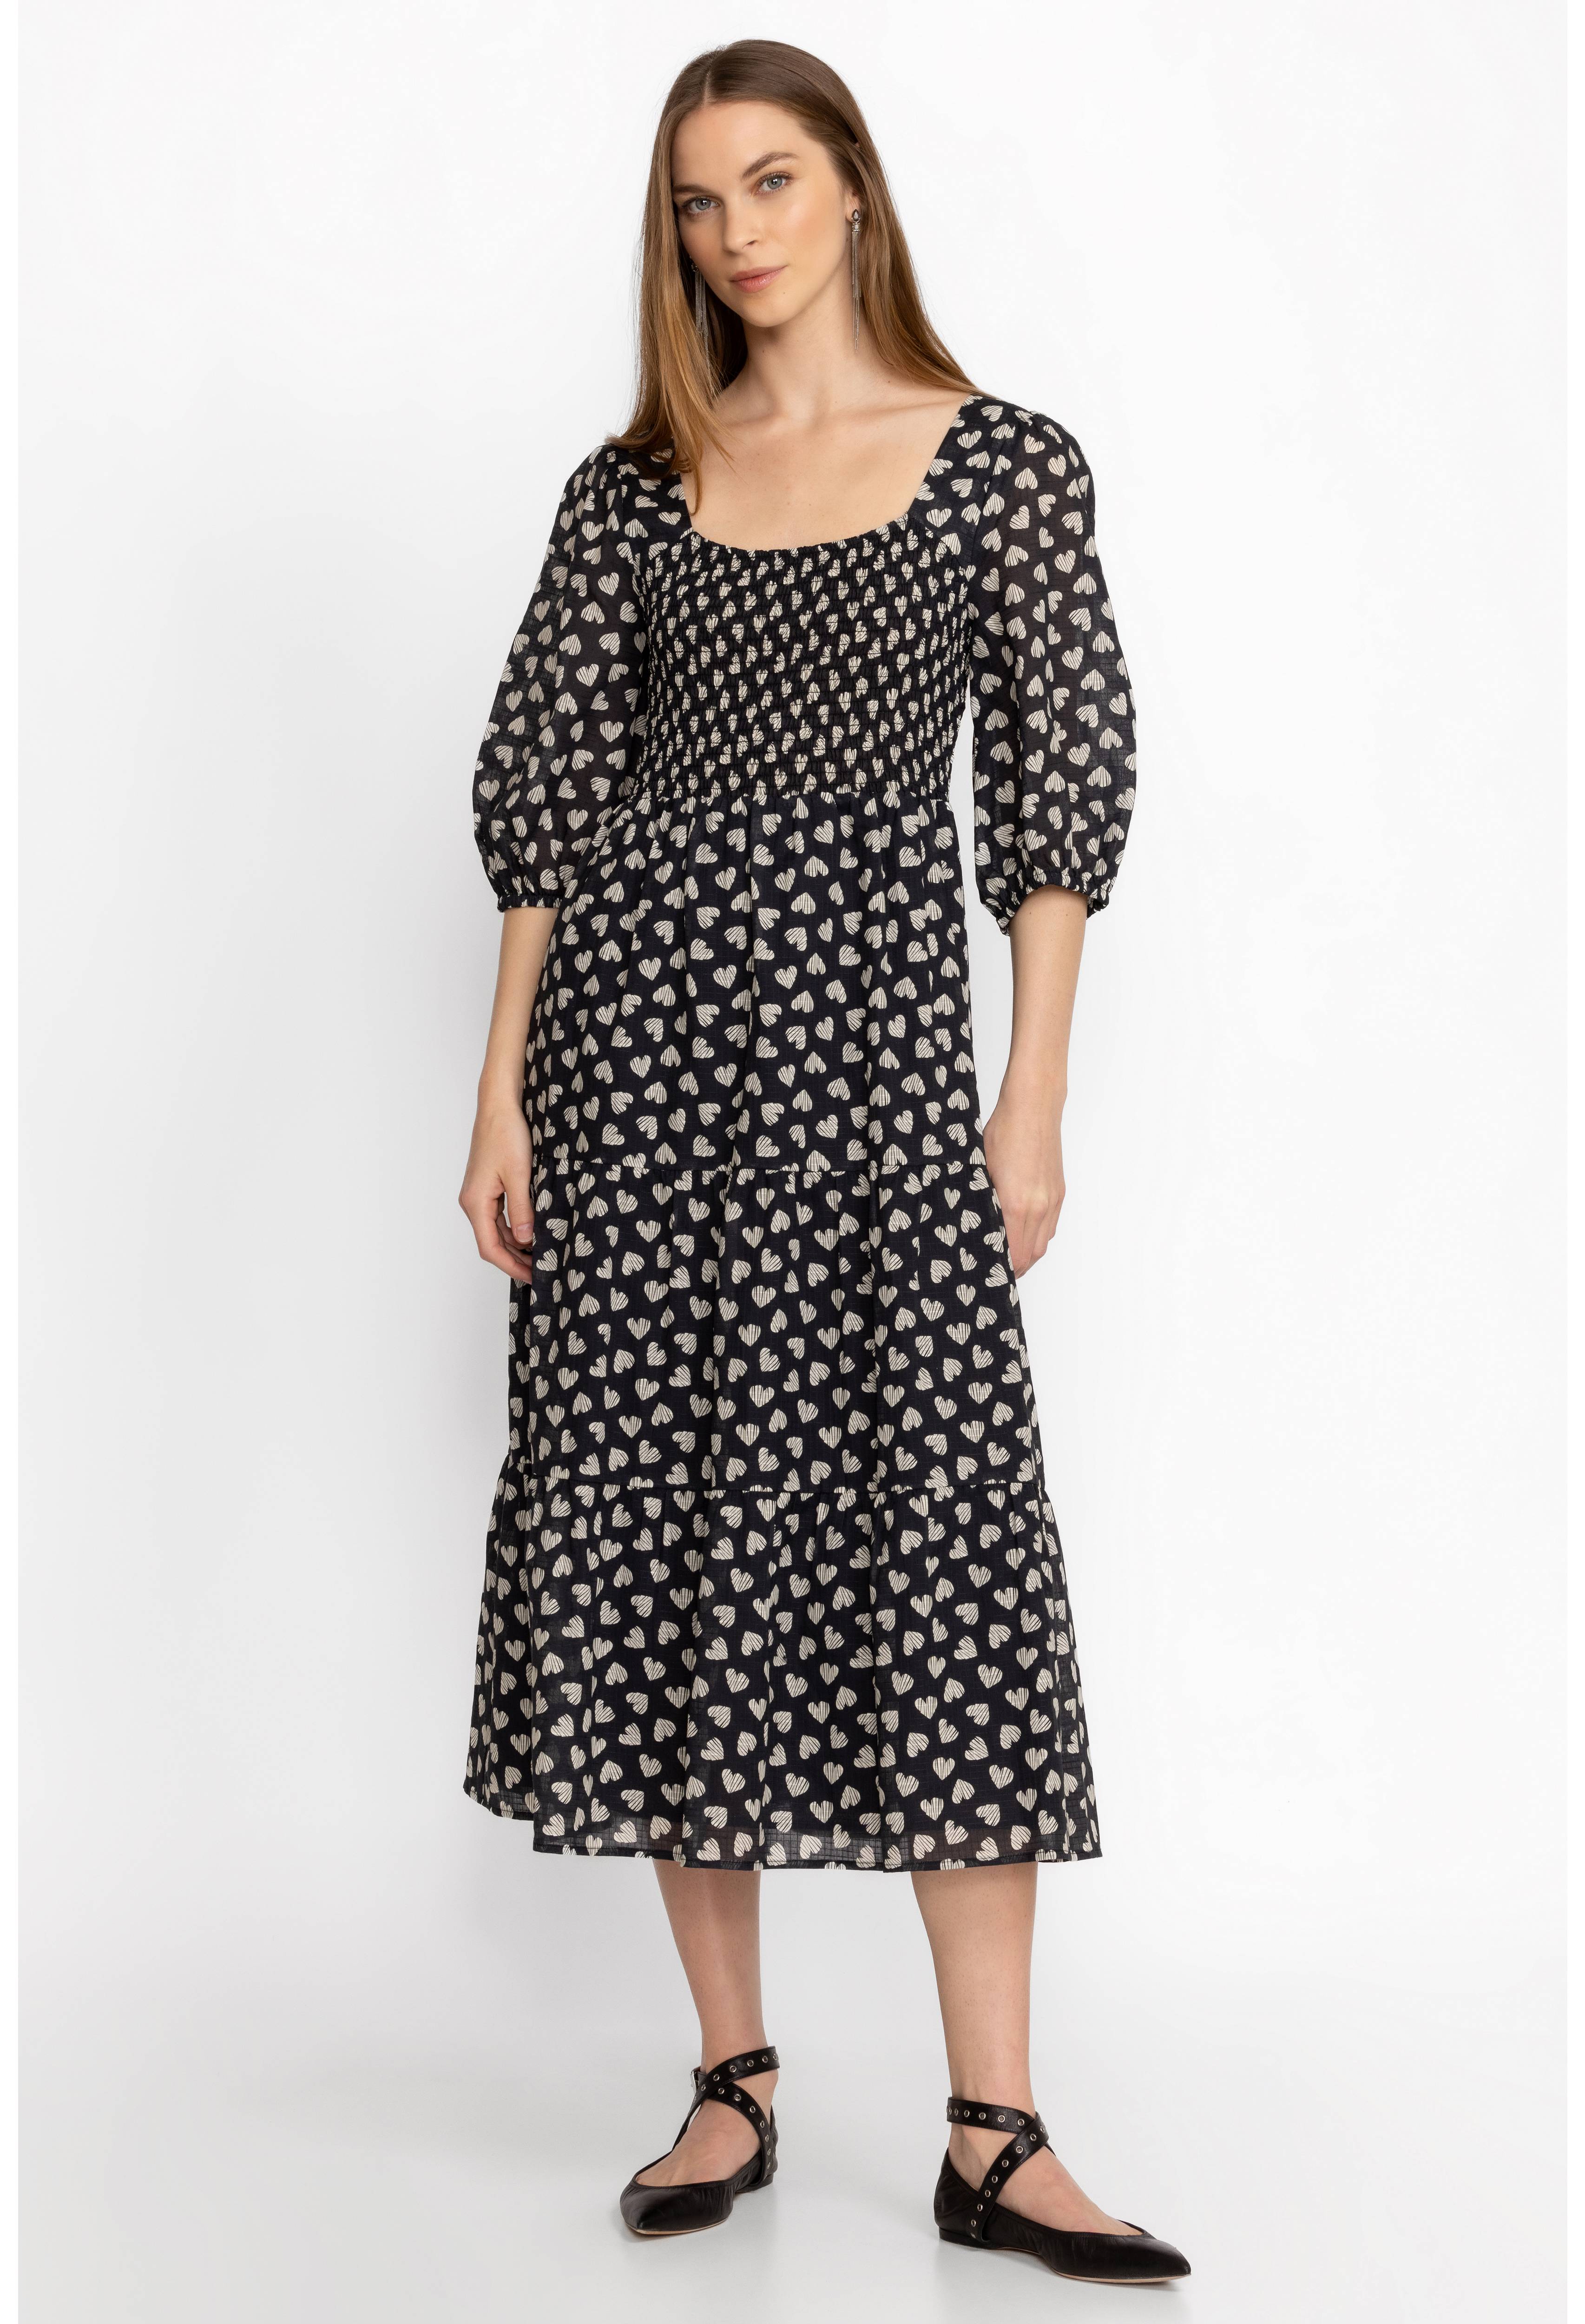 COUPLE OF HEARTS COTTON MIDI DRESS, , large image number 1